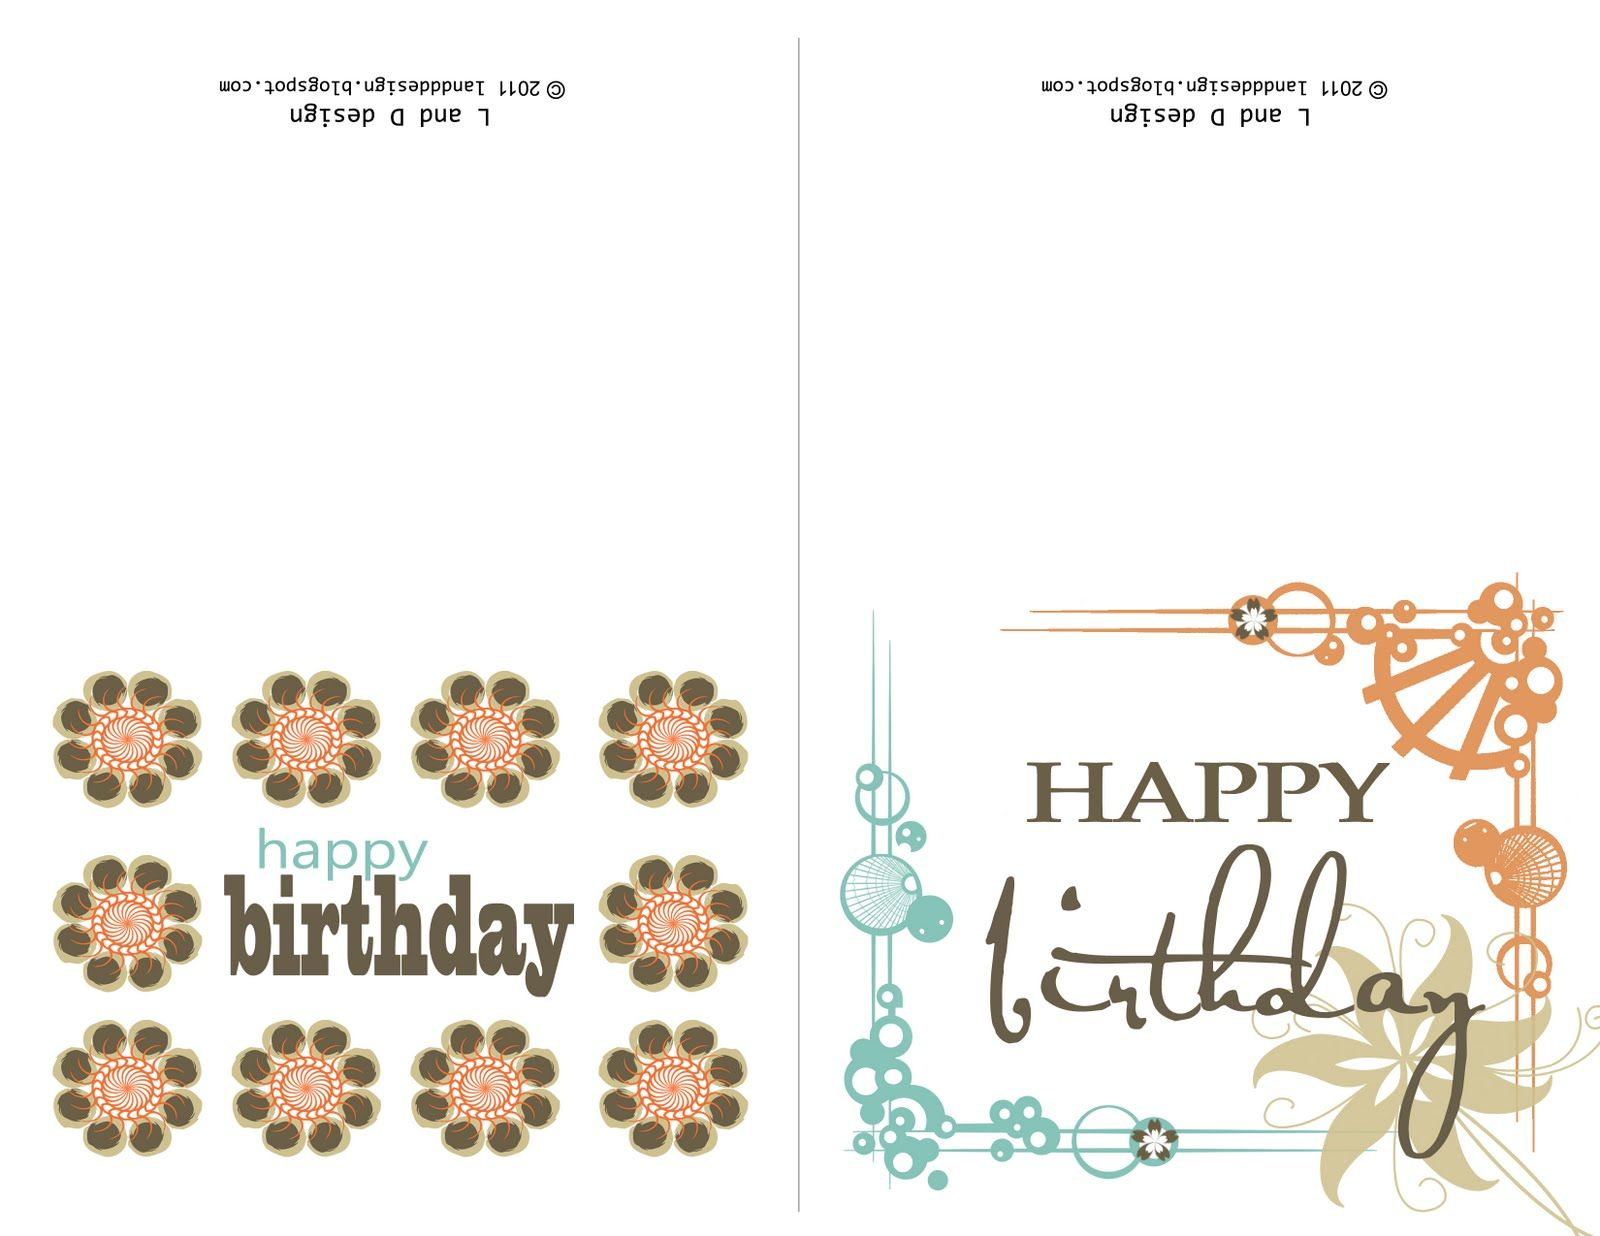 Printable Birthday Cards For Mom | Happy Birthday To You | Pinterest - Free Printable Personalized Birthday Cards